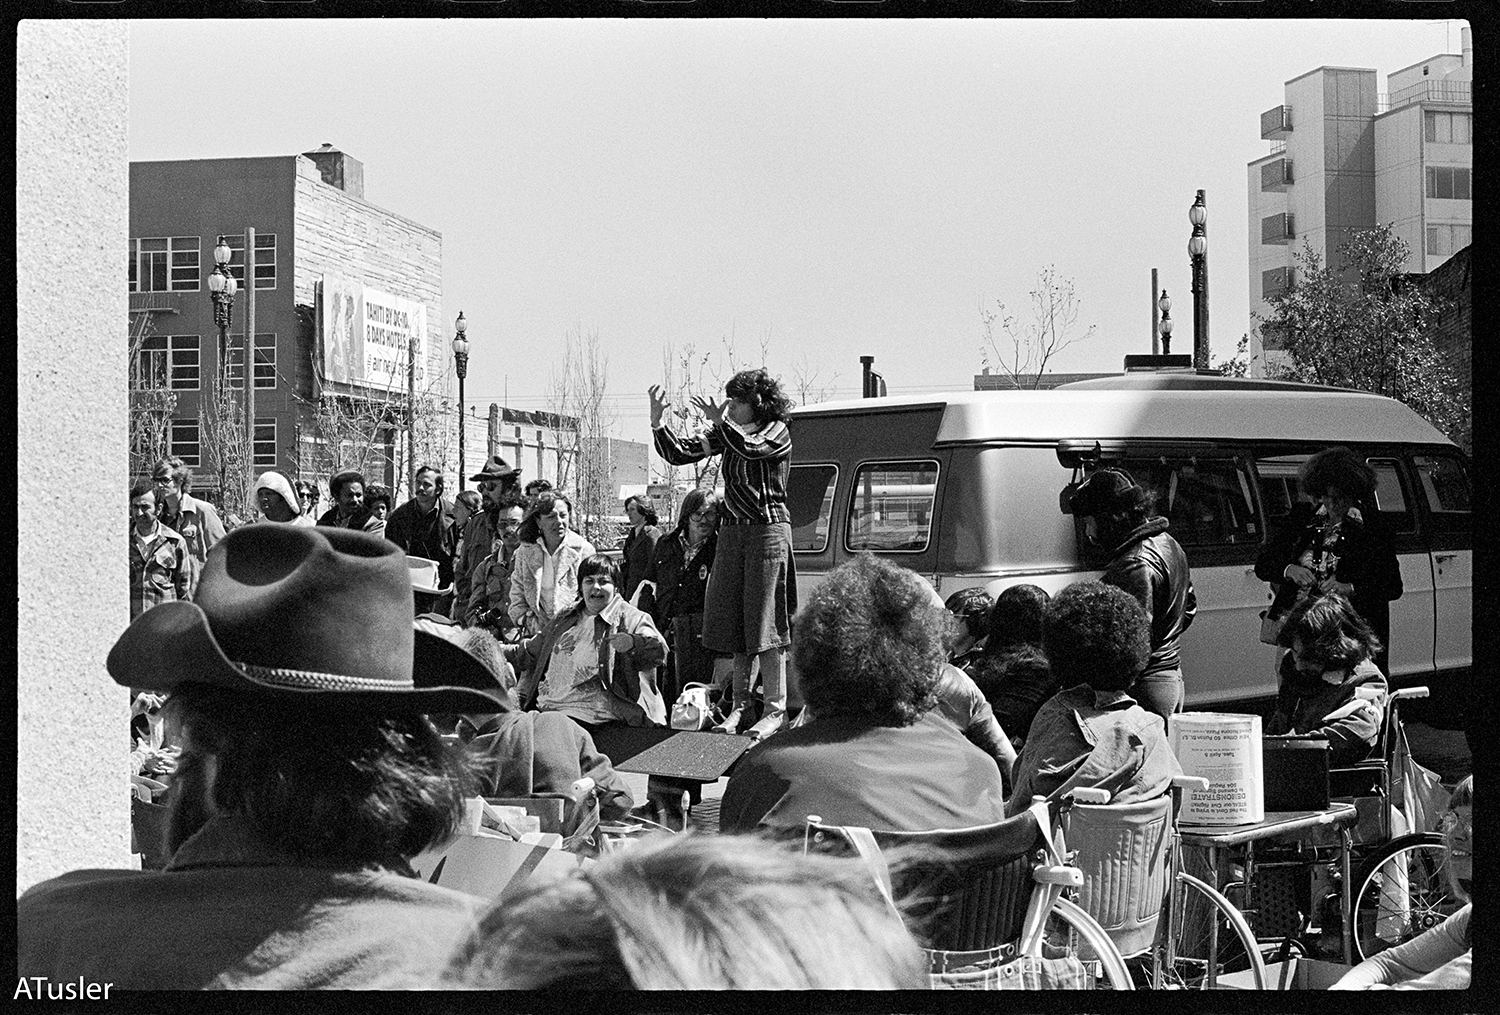 Black and white photo of crowd looking on, a person using ASL is seen at the back of a van's wheelchair lift